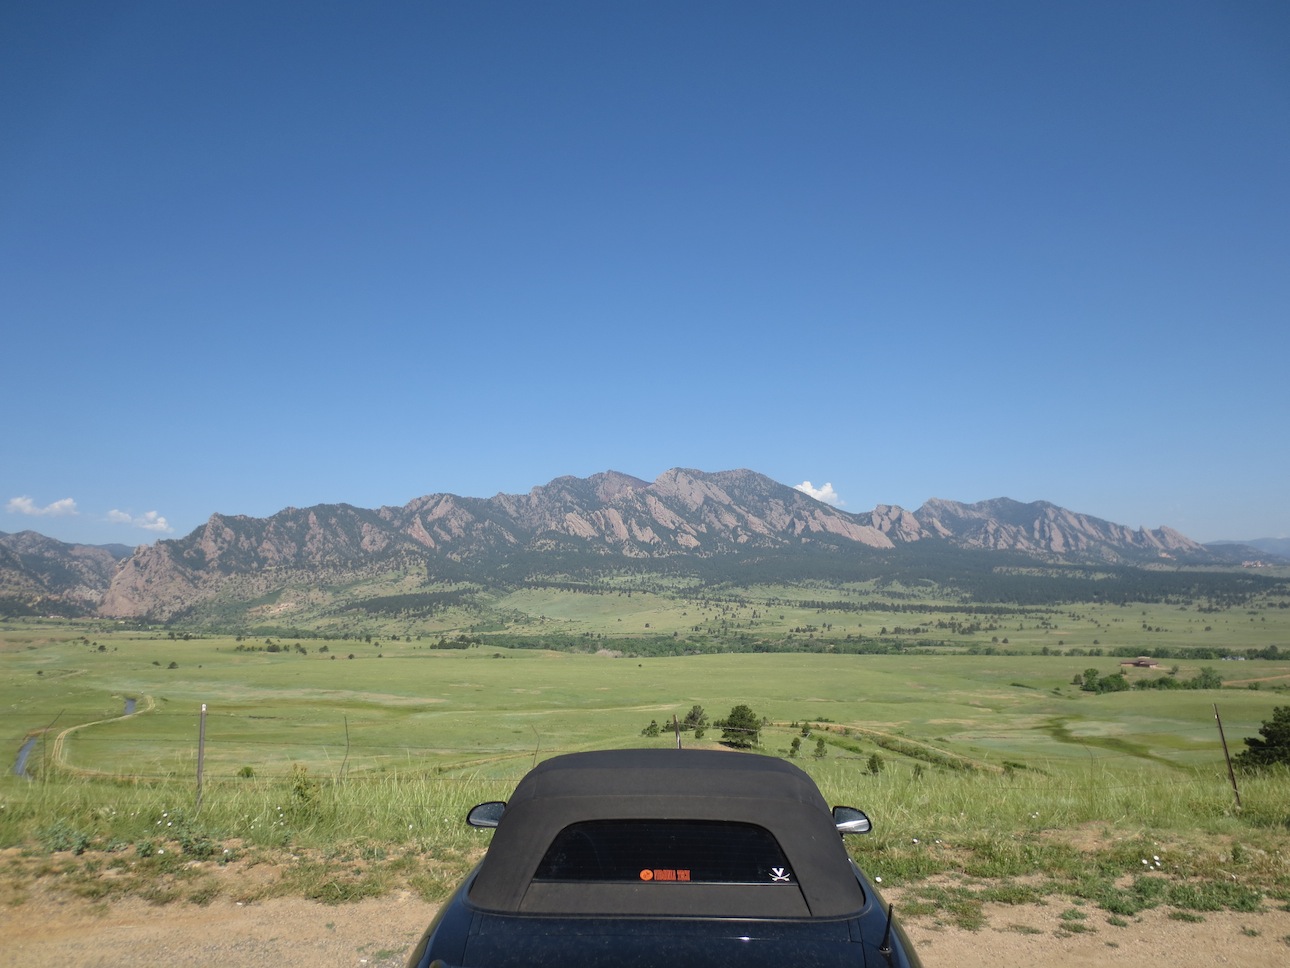 S2000 in near-ground with mountains in the background.